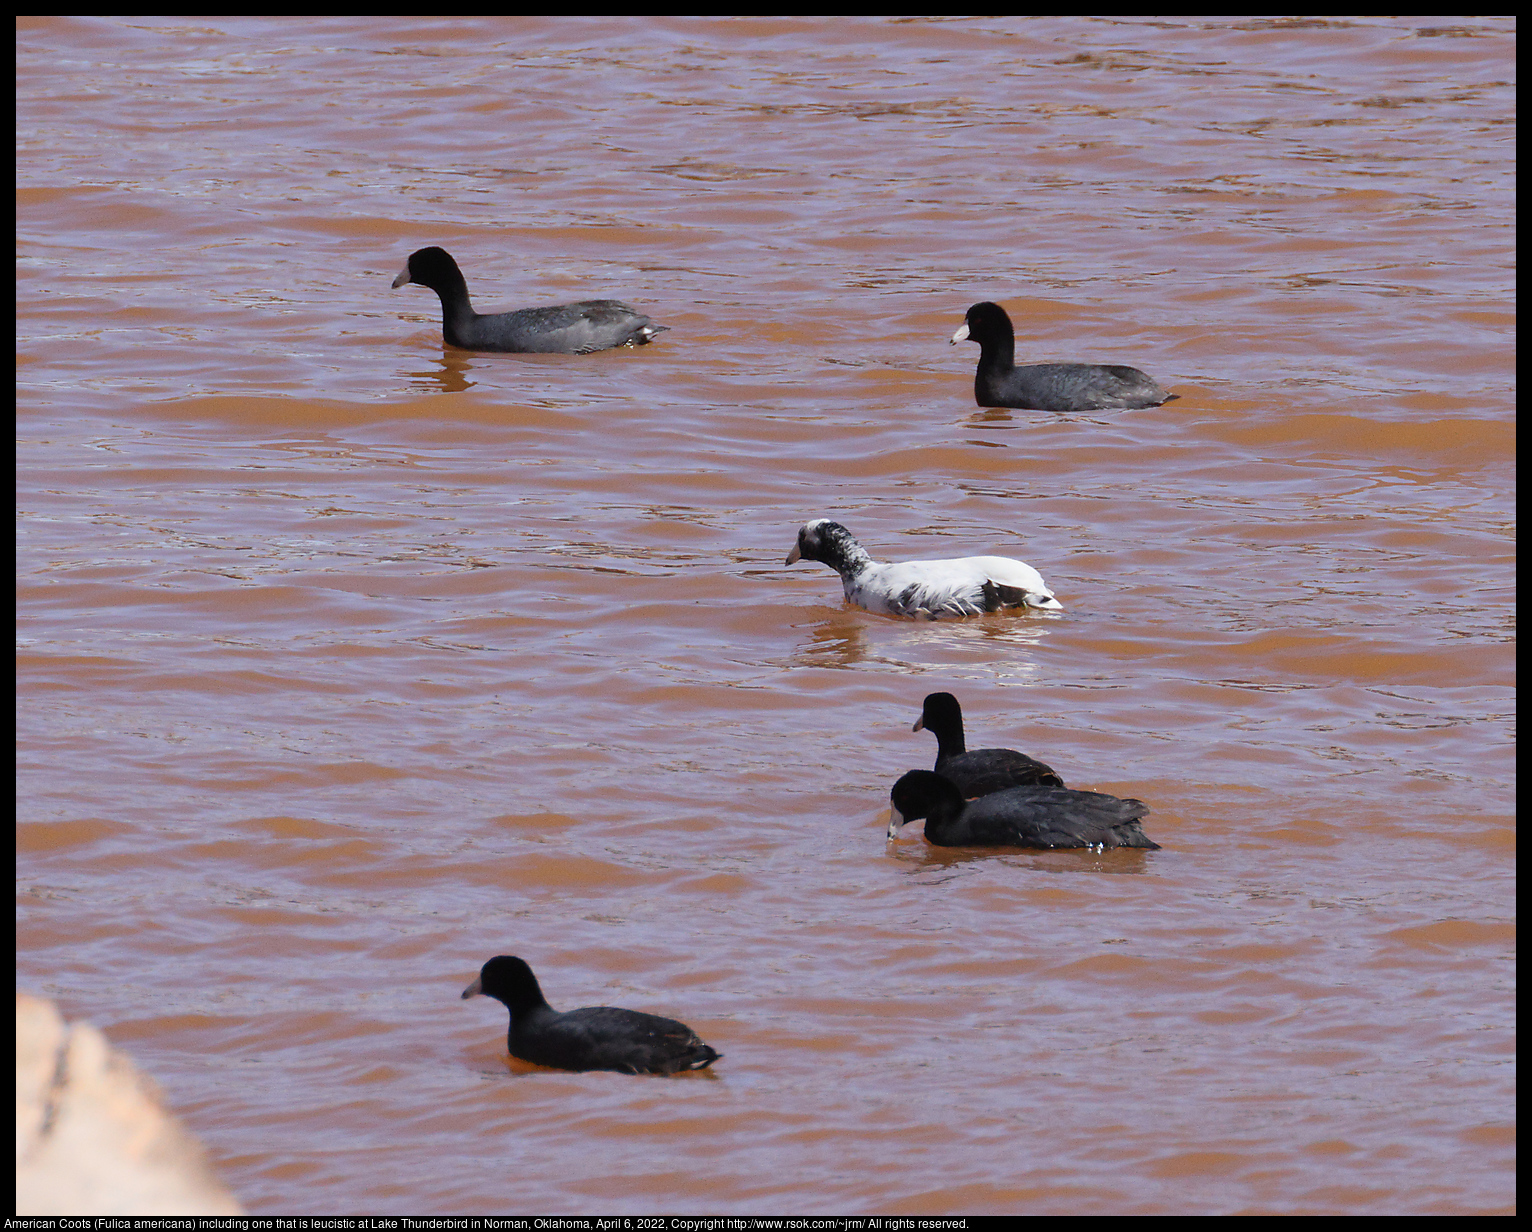 American Coots (Fulica americana) including one that is leucistic at Lake Thunderbird in Norman, Oklahoma, April 6, 2022